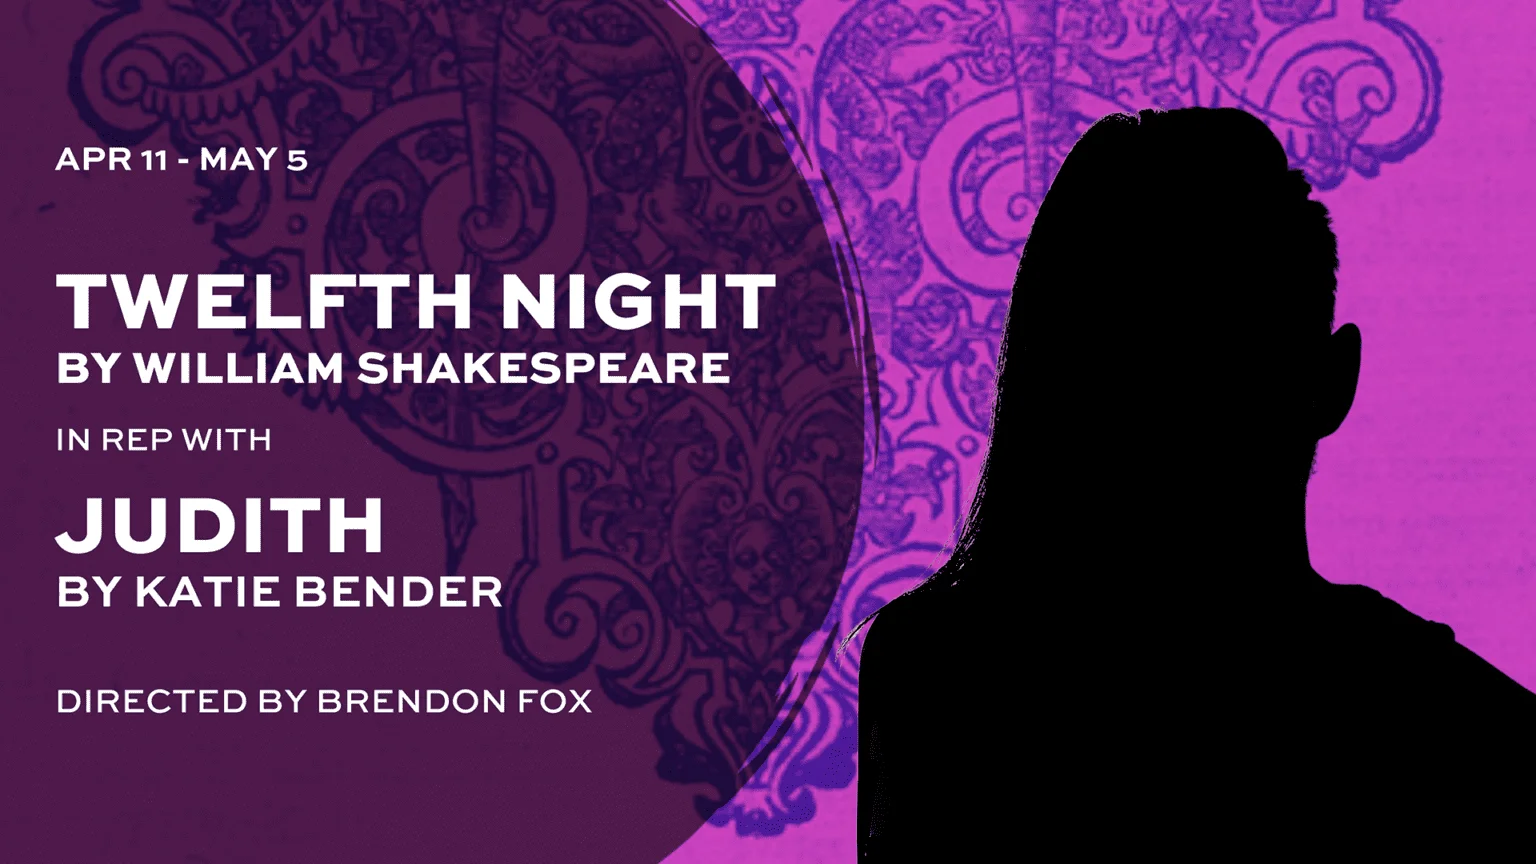 Shakespeare's "Twelfth Night" in REP with Katie Bender's "Judith" - The Hanover Theatre THT Rep (Worcester, MA.)